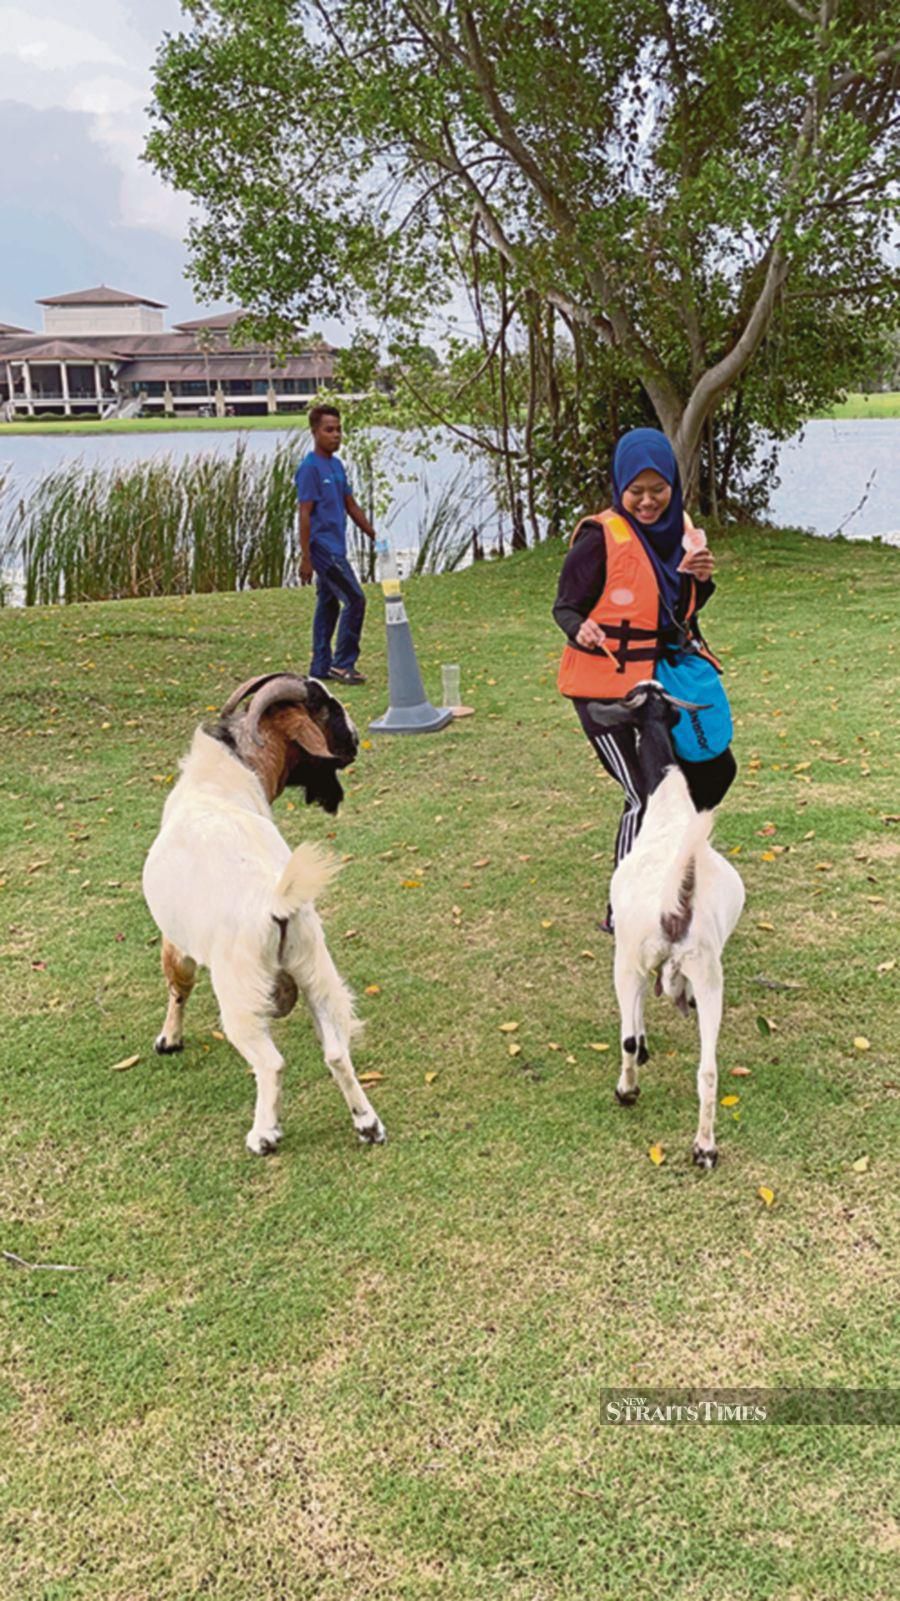 Enjoy feeding goats and other animals at the Animal Farm.